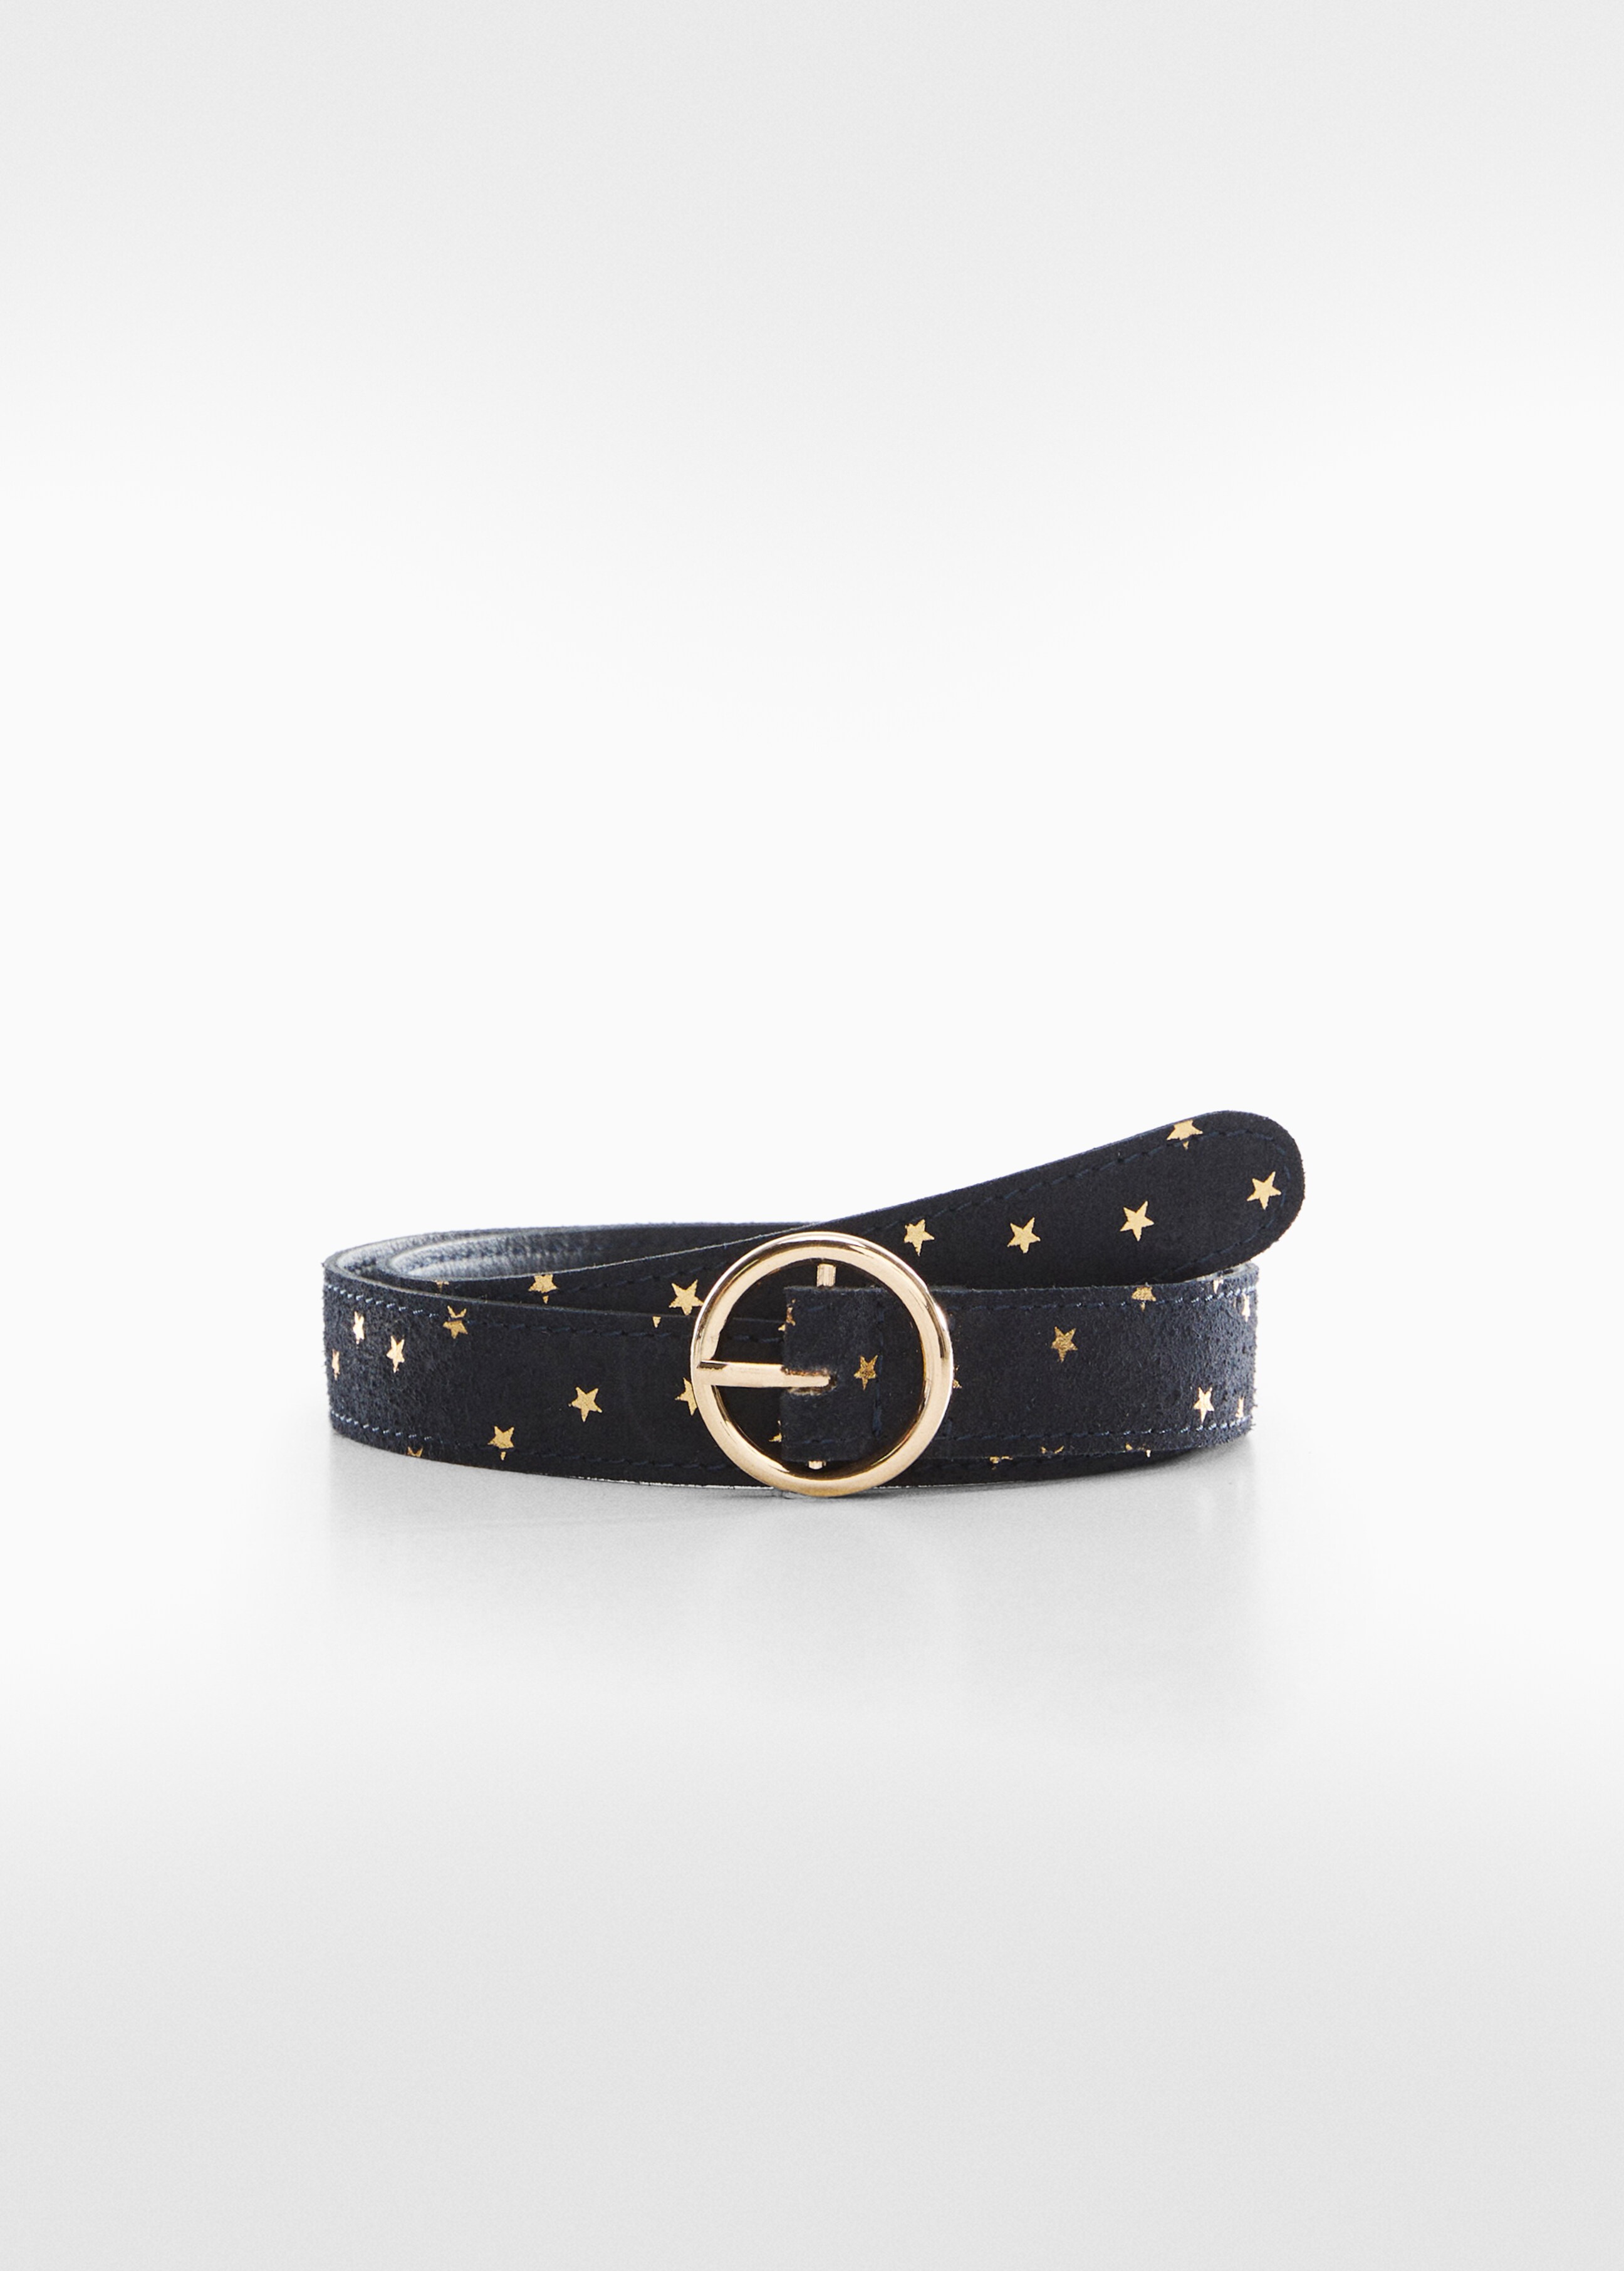 Stars leather belt - Article without model